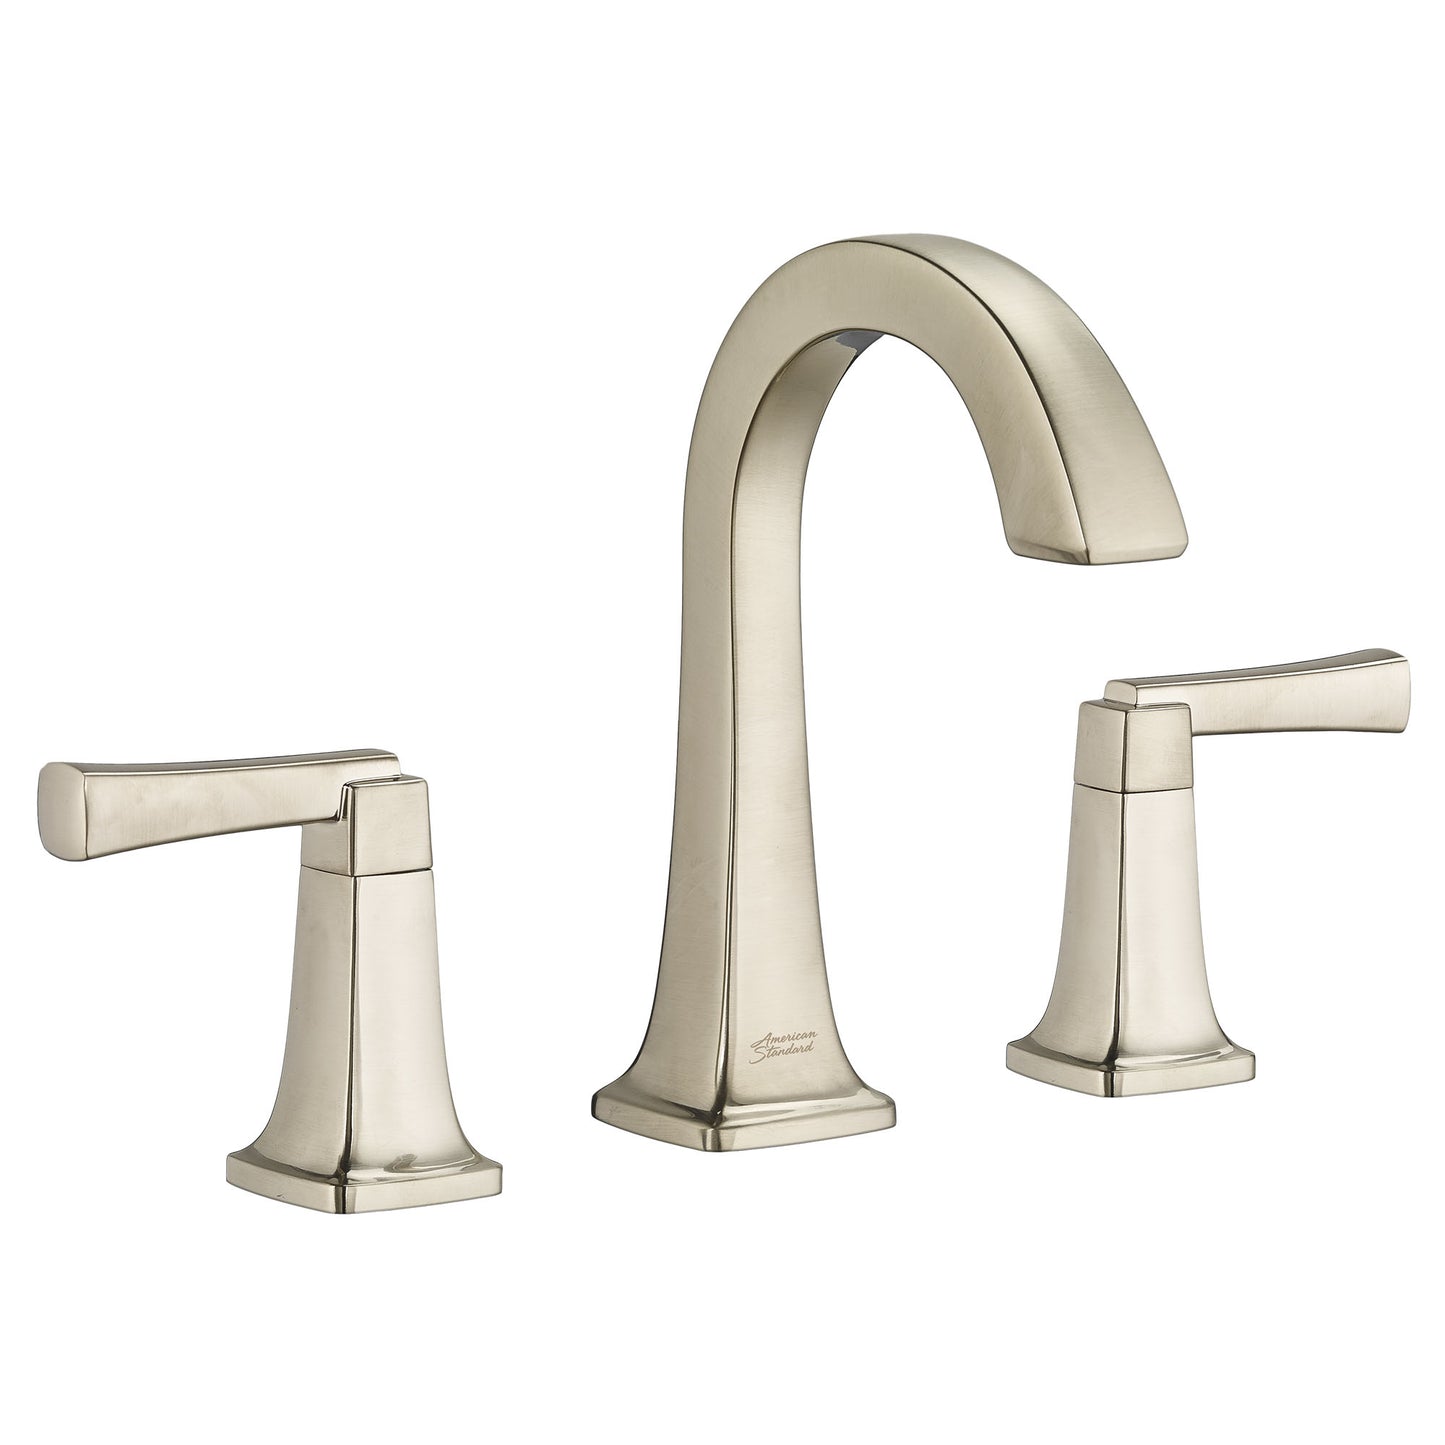 Townsend 8" Widespread Faucet - Brushed Nickel - 7353801.295